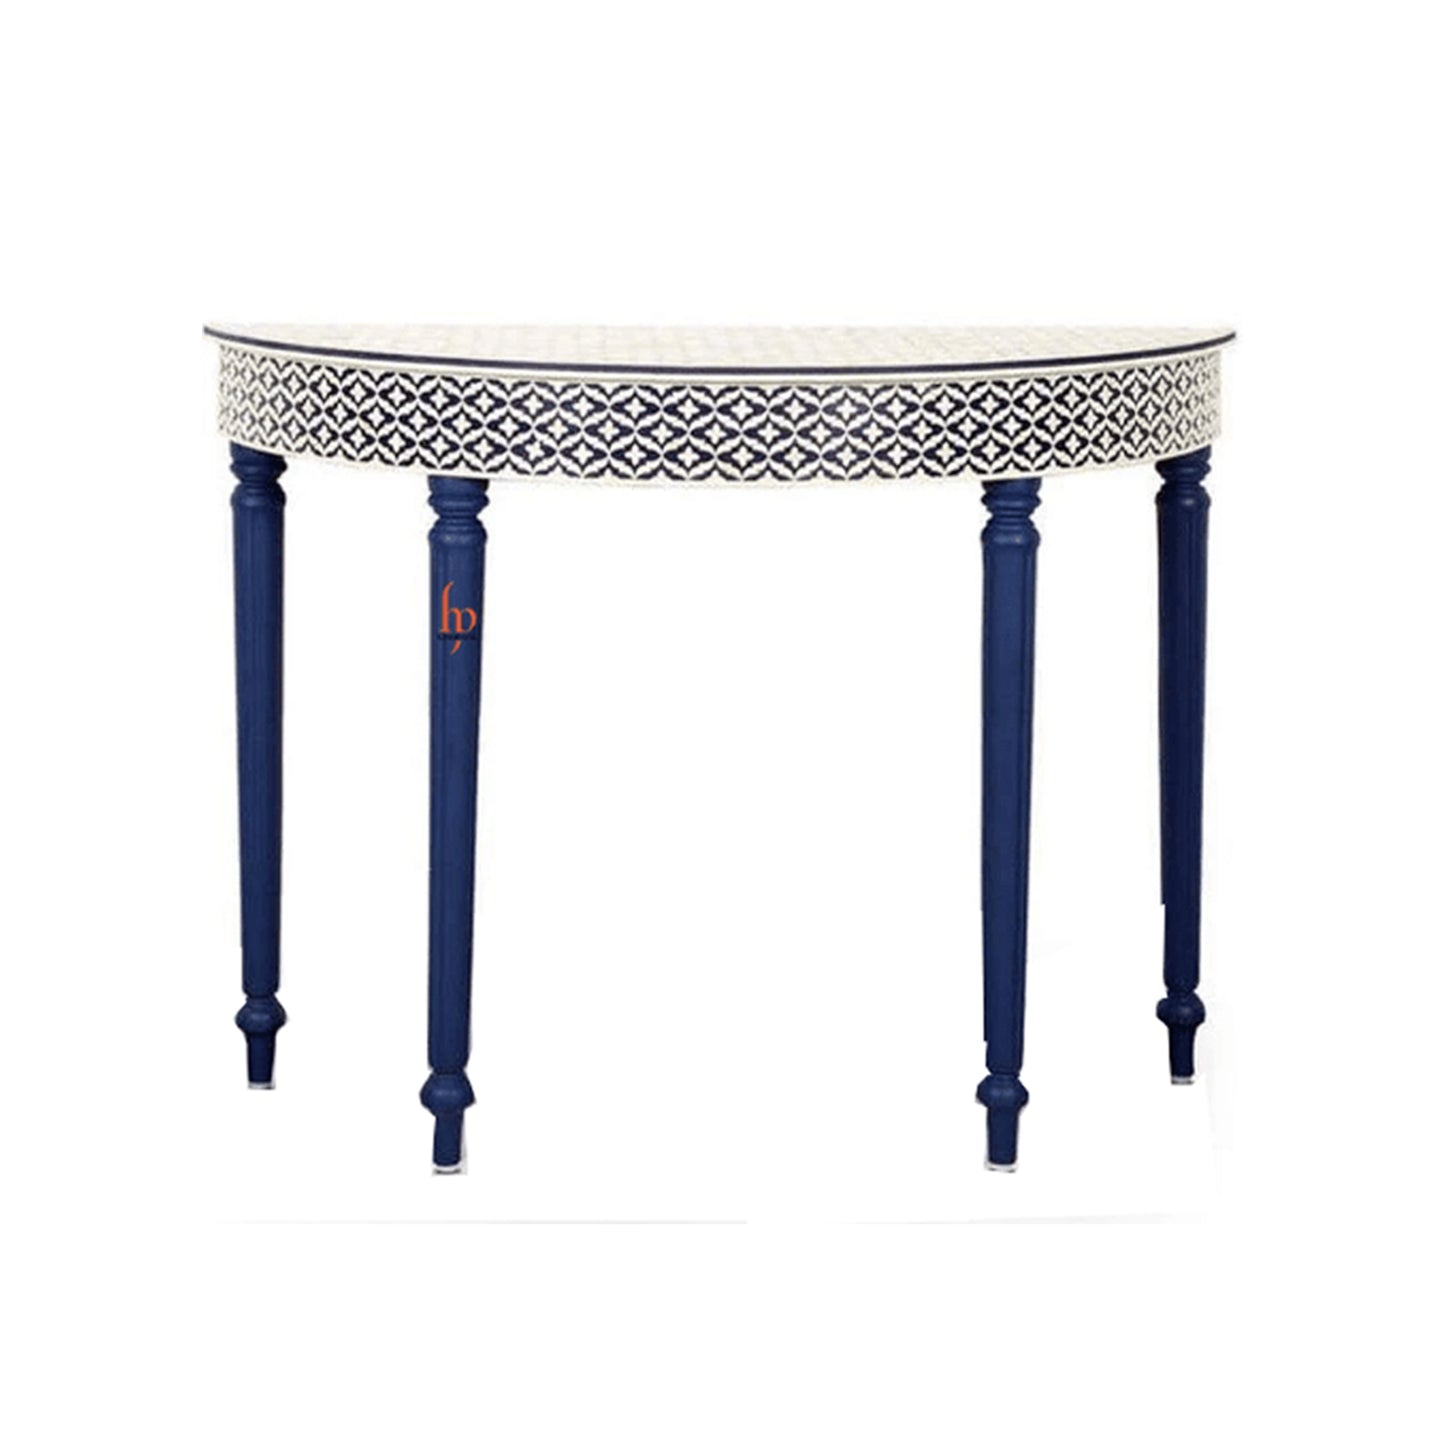 Personalized Bone Inlay Entryway Blue Console Semicircular Floral Table in Indian Motif Design